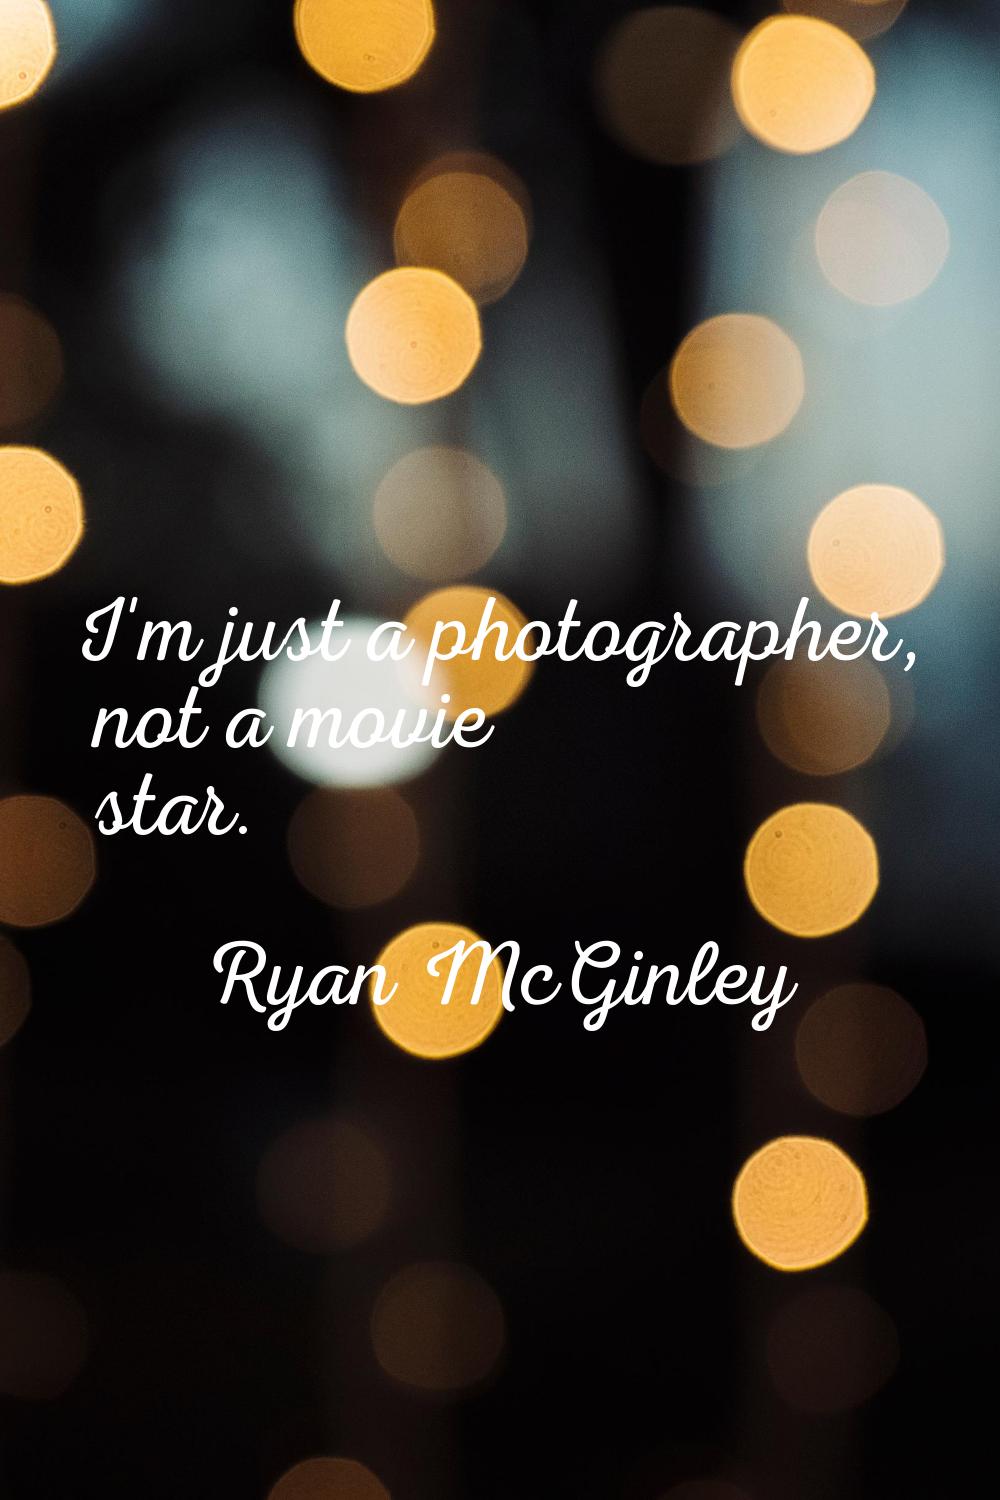 I'm just a photographer, not a movie star.